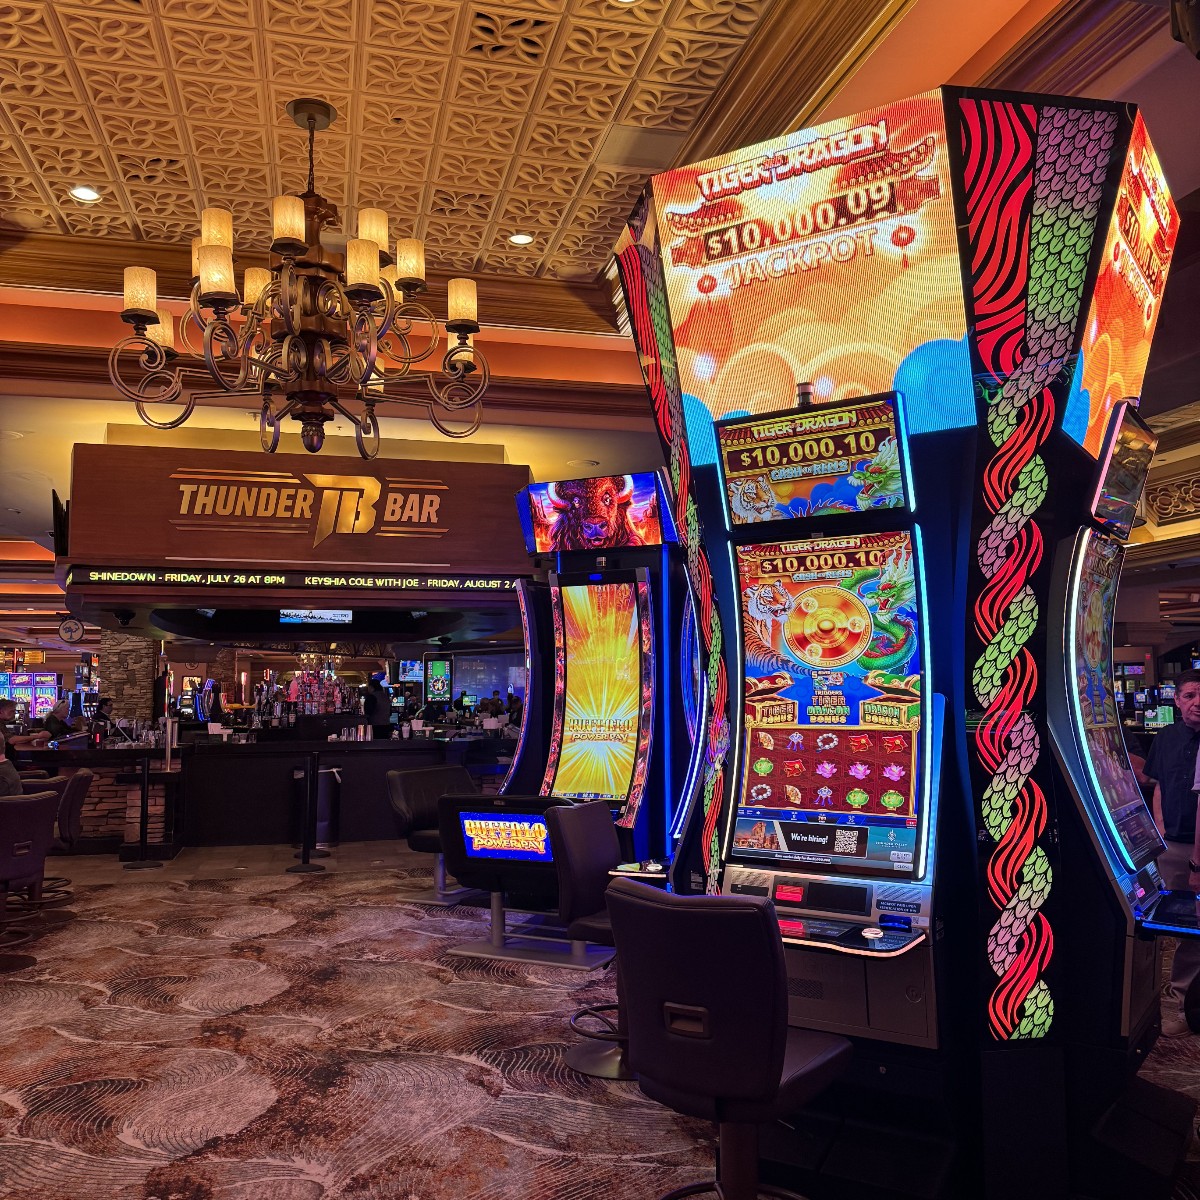 Be one of the first in NorCal to play #IGT Tiger and Dragon! Located near Thunder Bar. 🐅🐉🎰